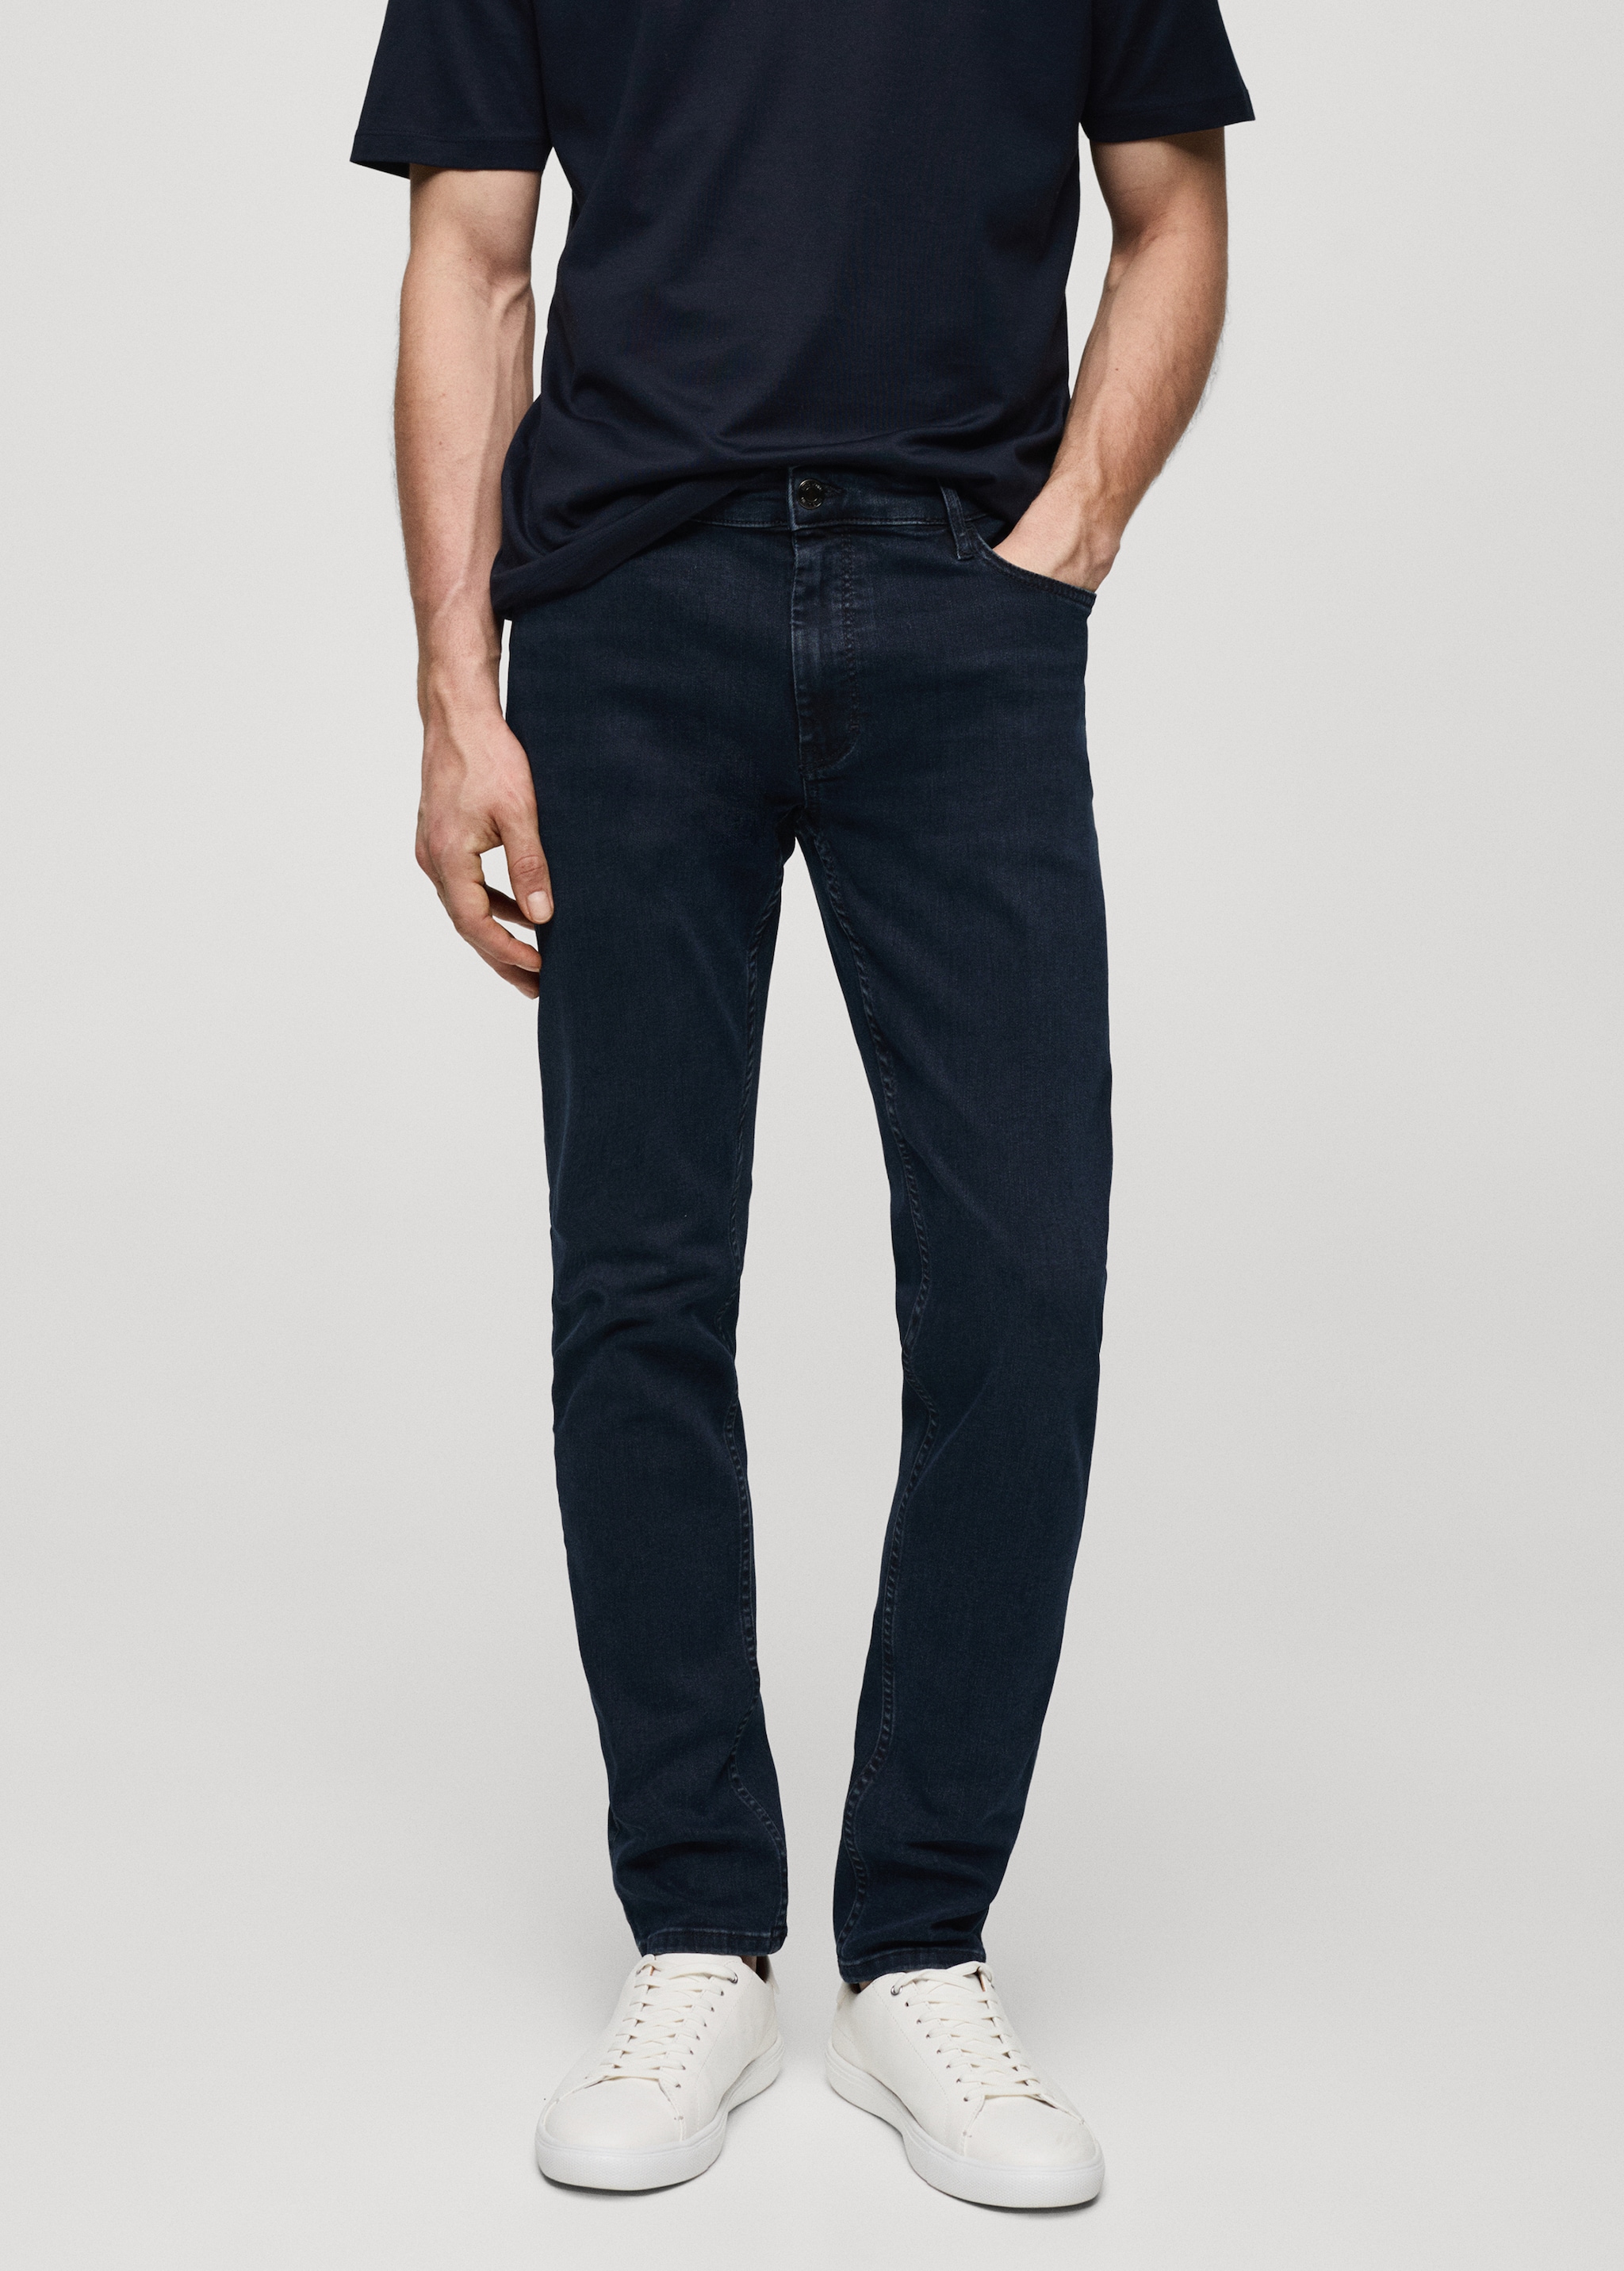 Jeans Patrick slim fit Ultra Soft Touch - Plano medio